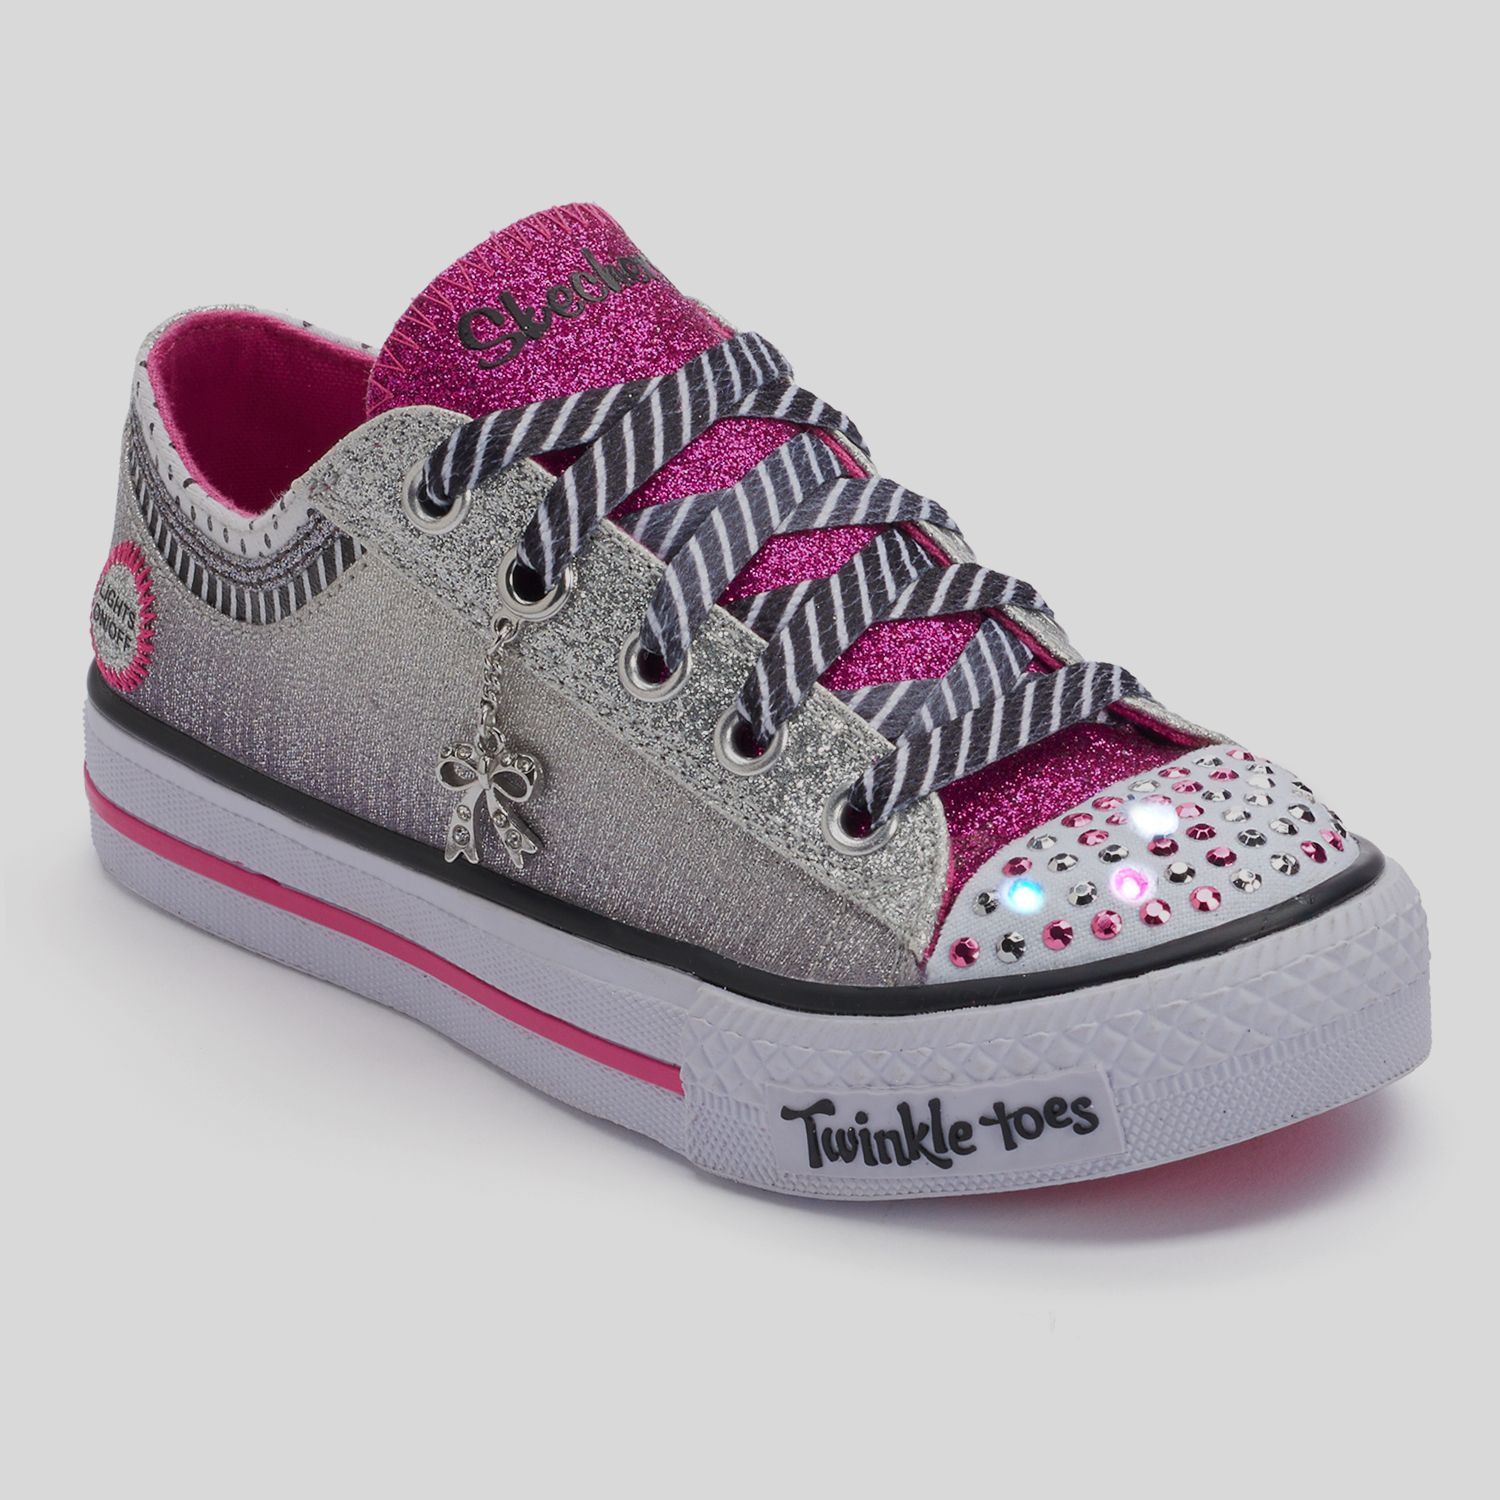 skechers twinkle toes charmingly chic girls light up sneakers